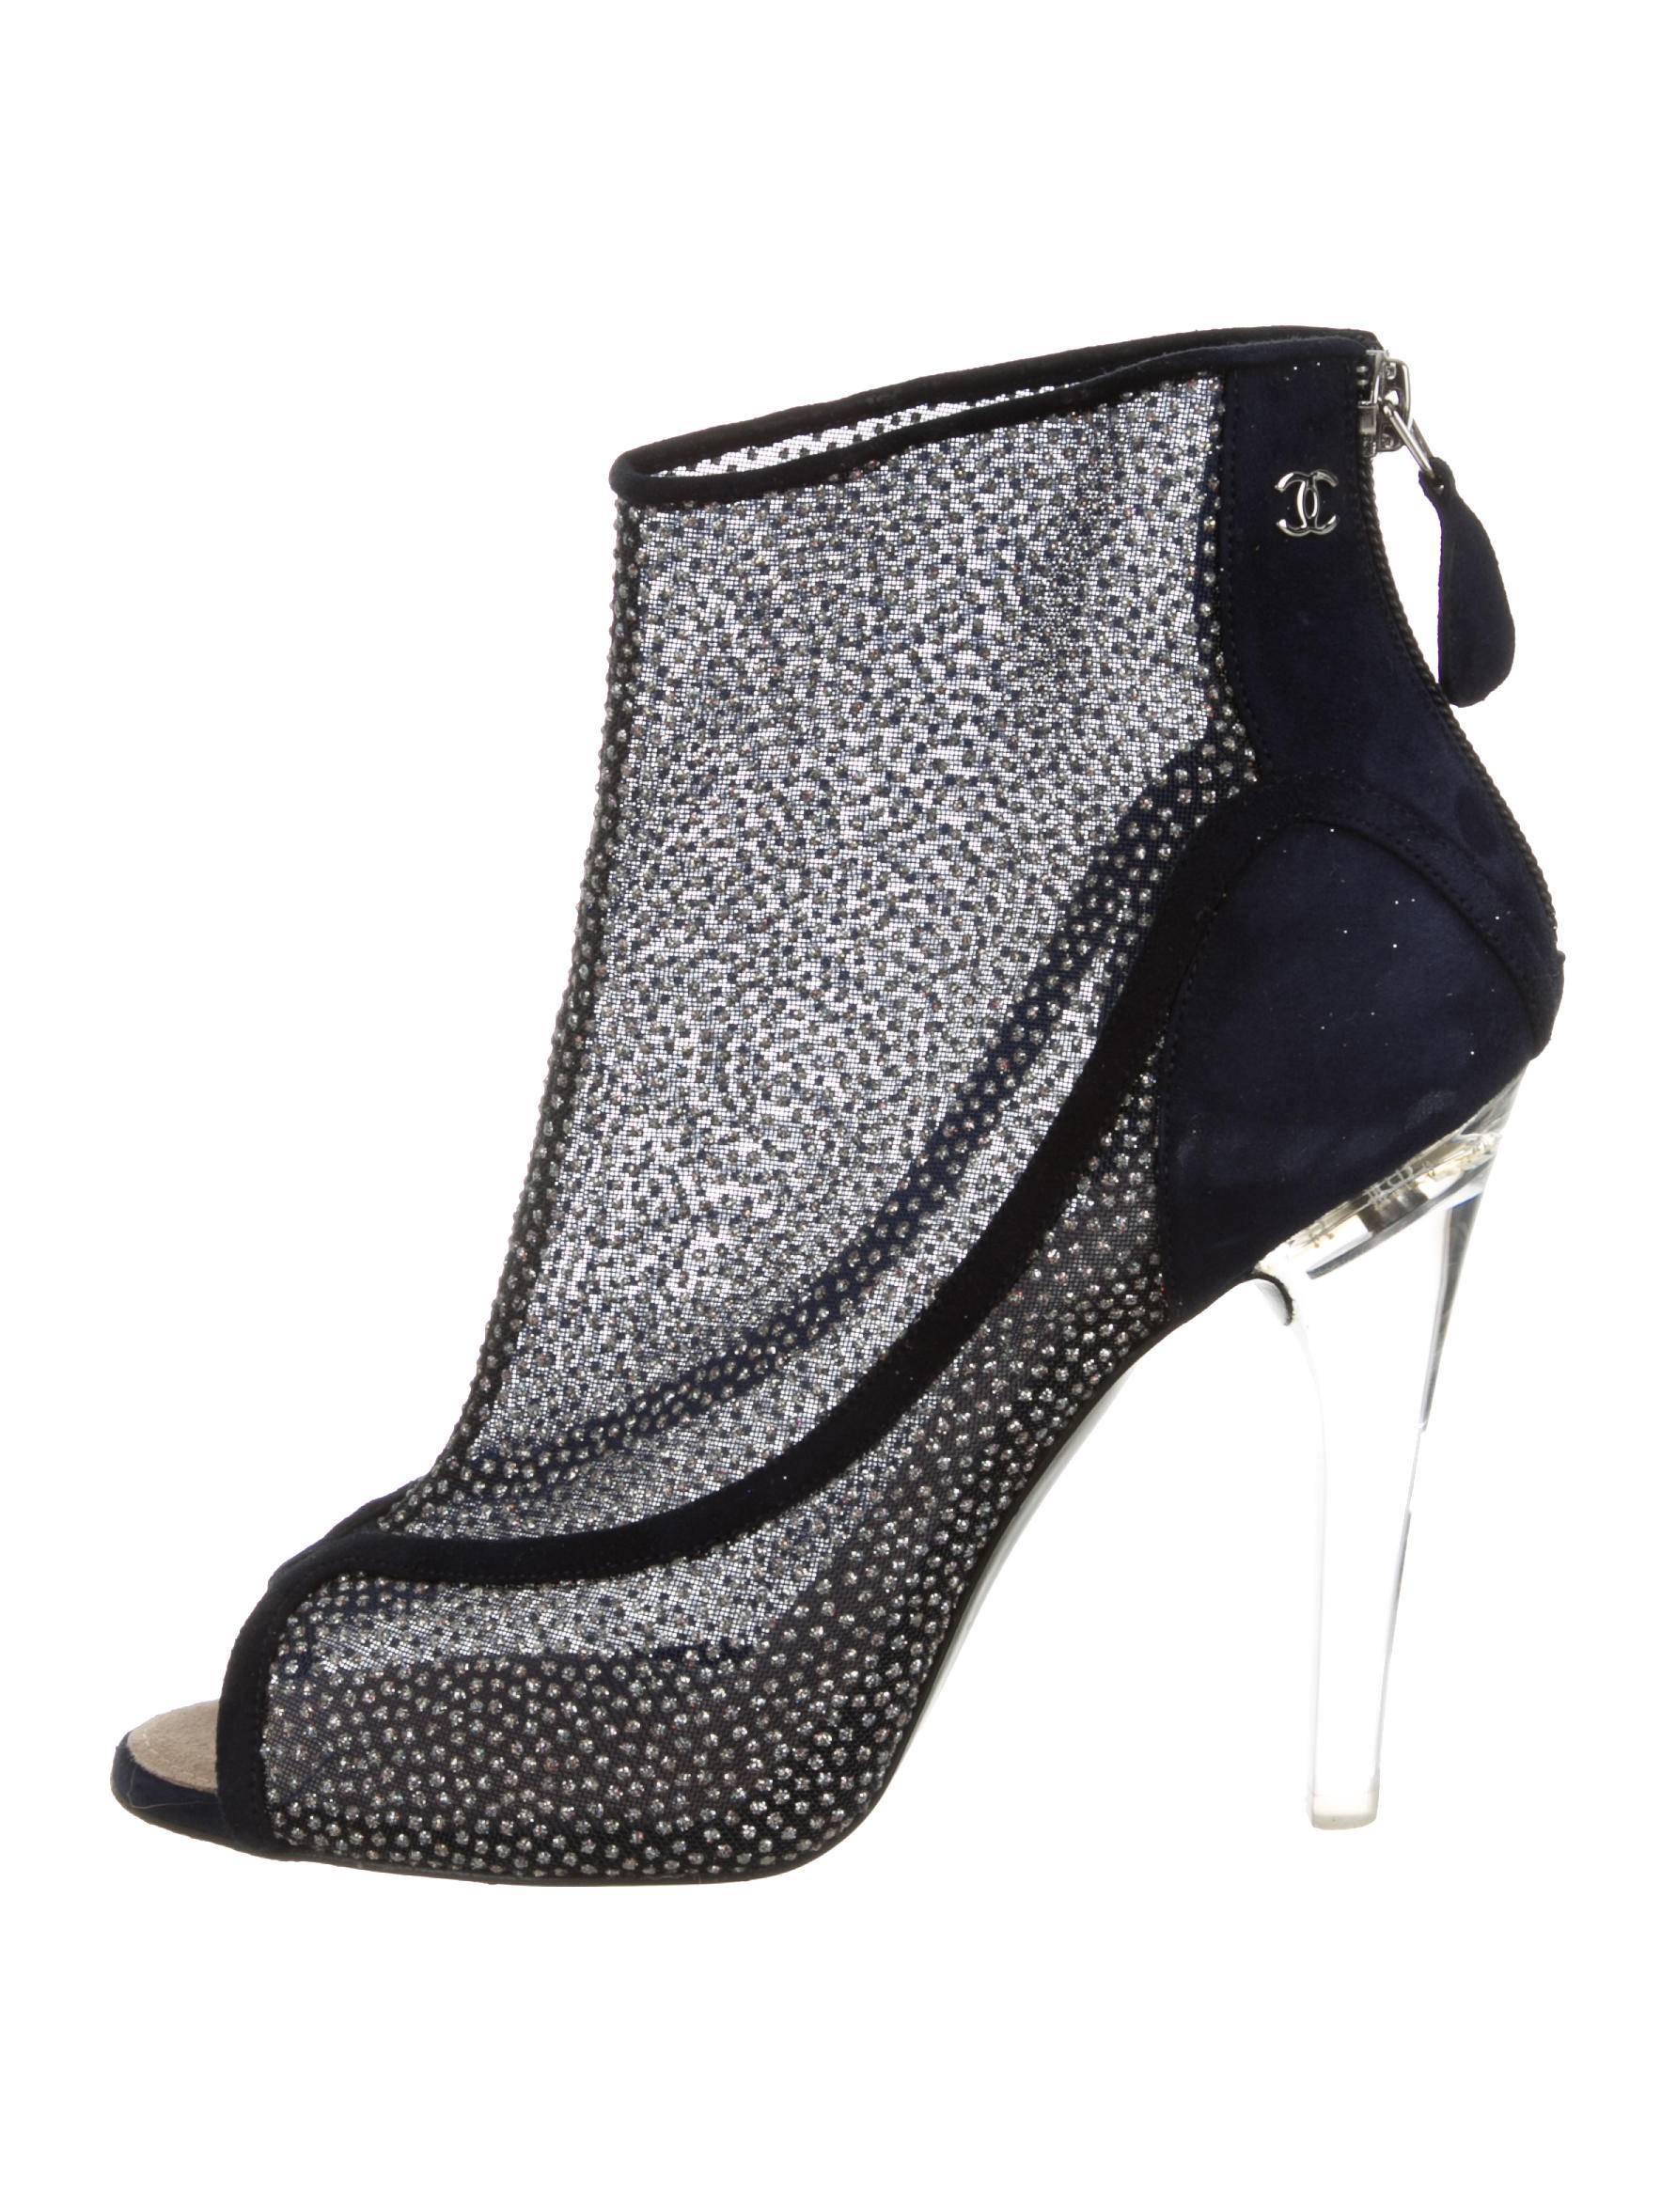 CURATOR'S NOTES

Ultra fab Chanel peep-toe booties with suede trim, silver-tone glitter embellishments throughout, interlocking CC embellishment at side, lucite heels and zip closure at counter. 

Size IT 37.5 (US7.5)
Mesh
Suede
Lucite